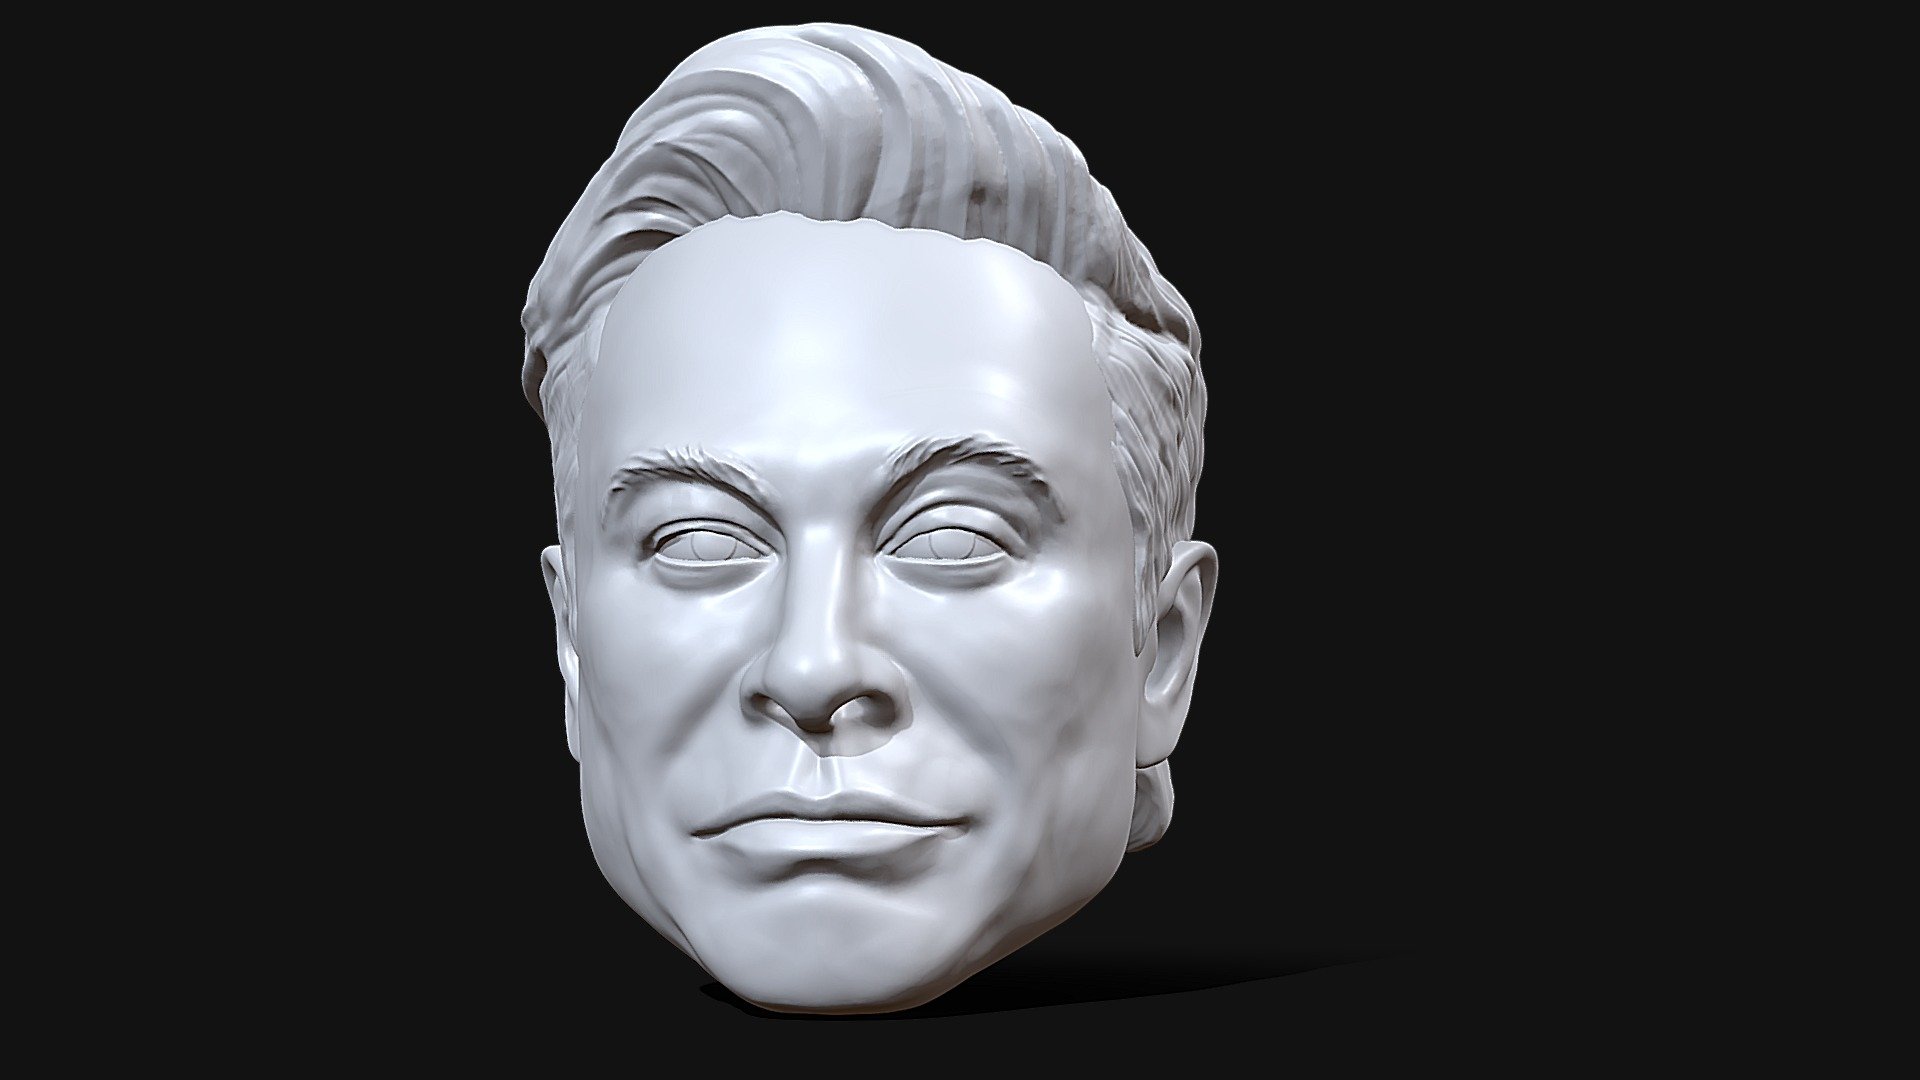 Digital portrait sculpt of Elon Musk. New version from me. 

STL file scaled to mattel elite scale action figure is included.

Browse my store to see more of my work. 

Message if interested to commission me. 

Tomislav.veg@gmail.com - Elon Musk 3D printable action figure portrait - Buy Royalty Free 3D model by TomVeg (@tomislavveg) 3d model